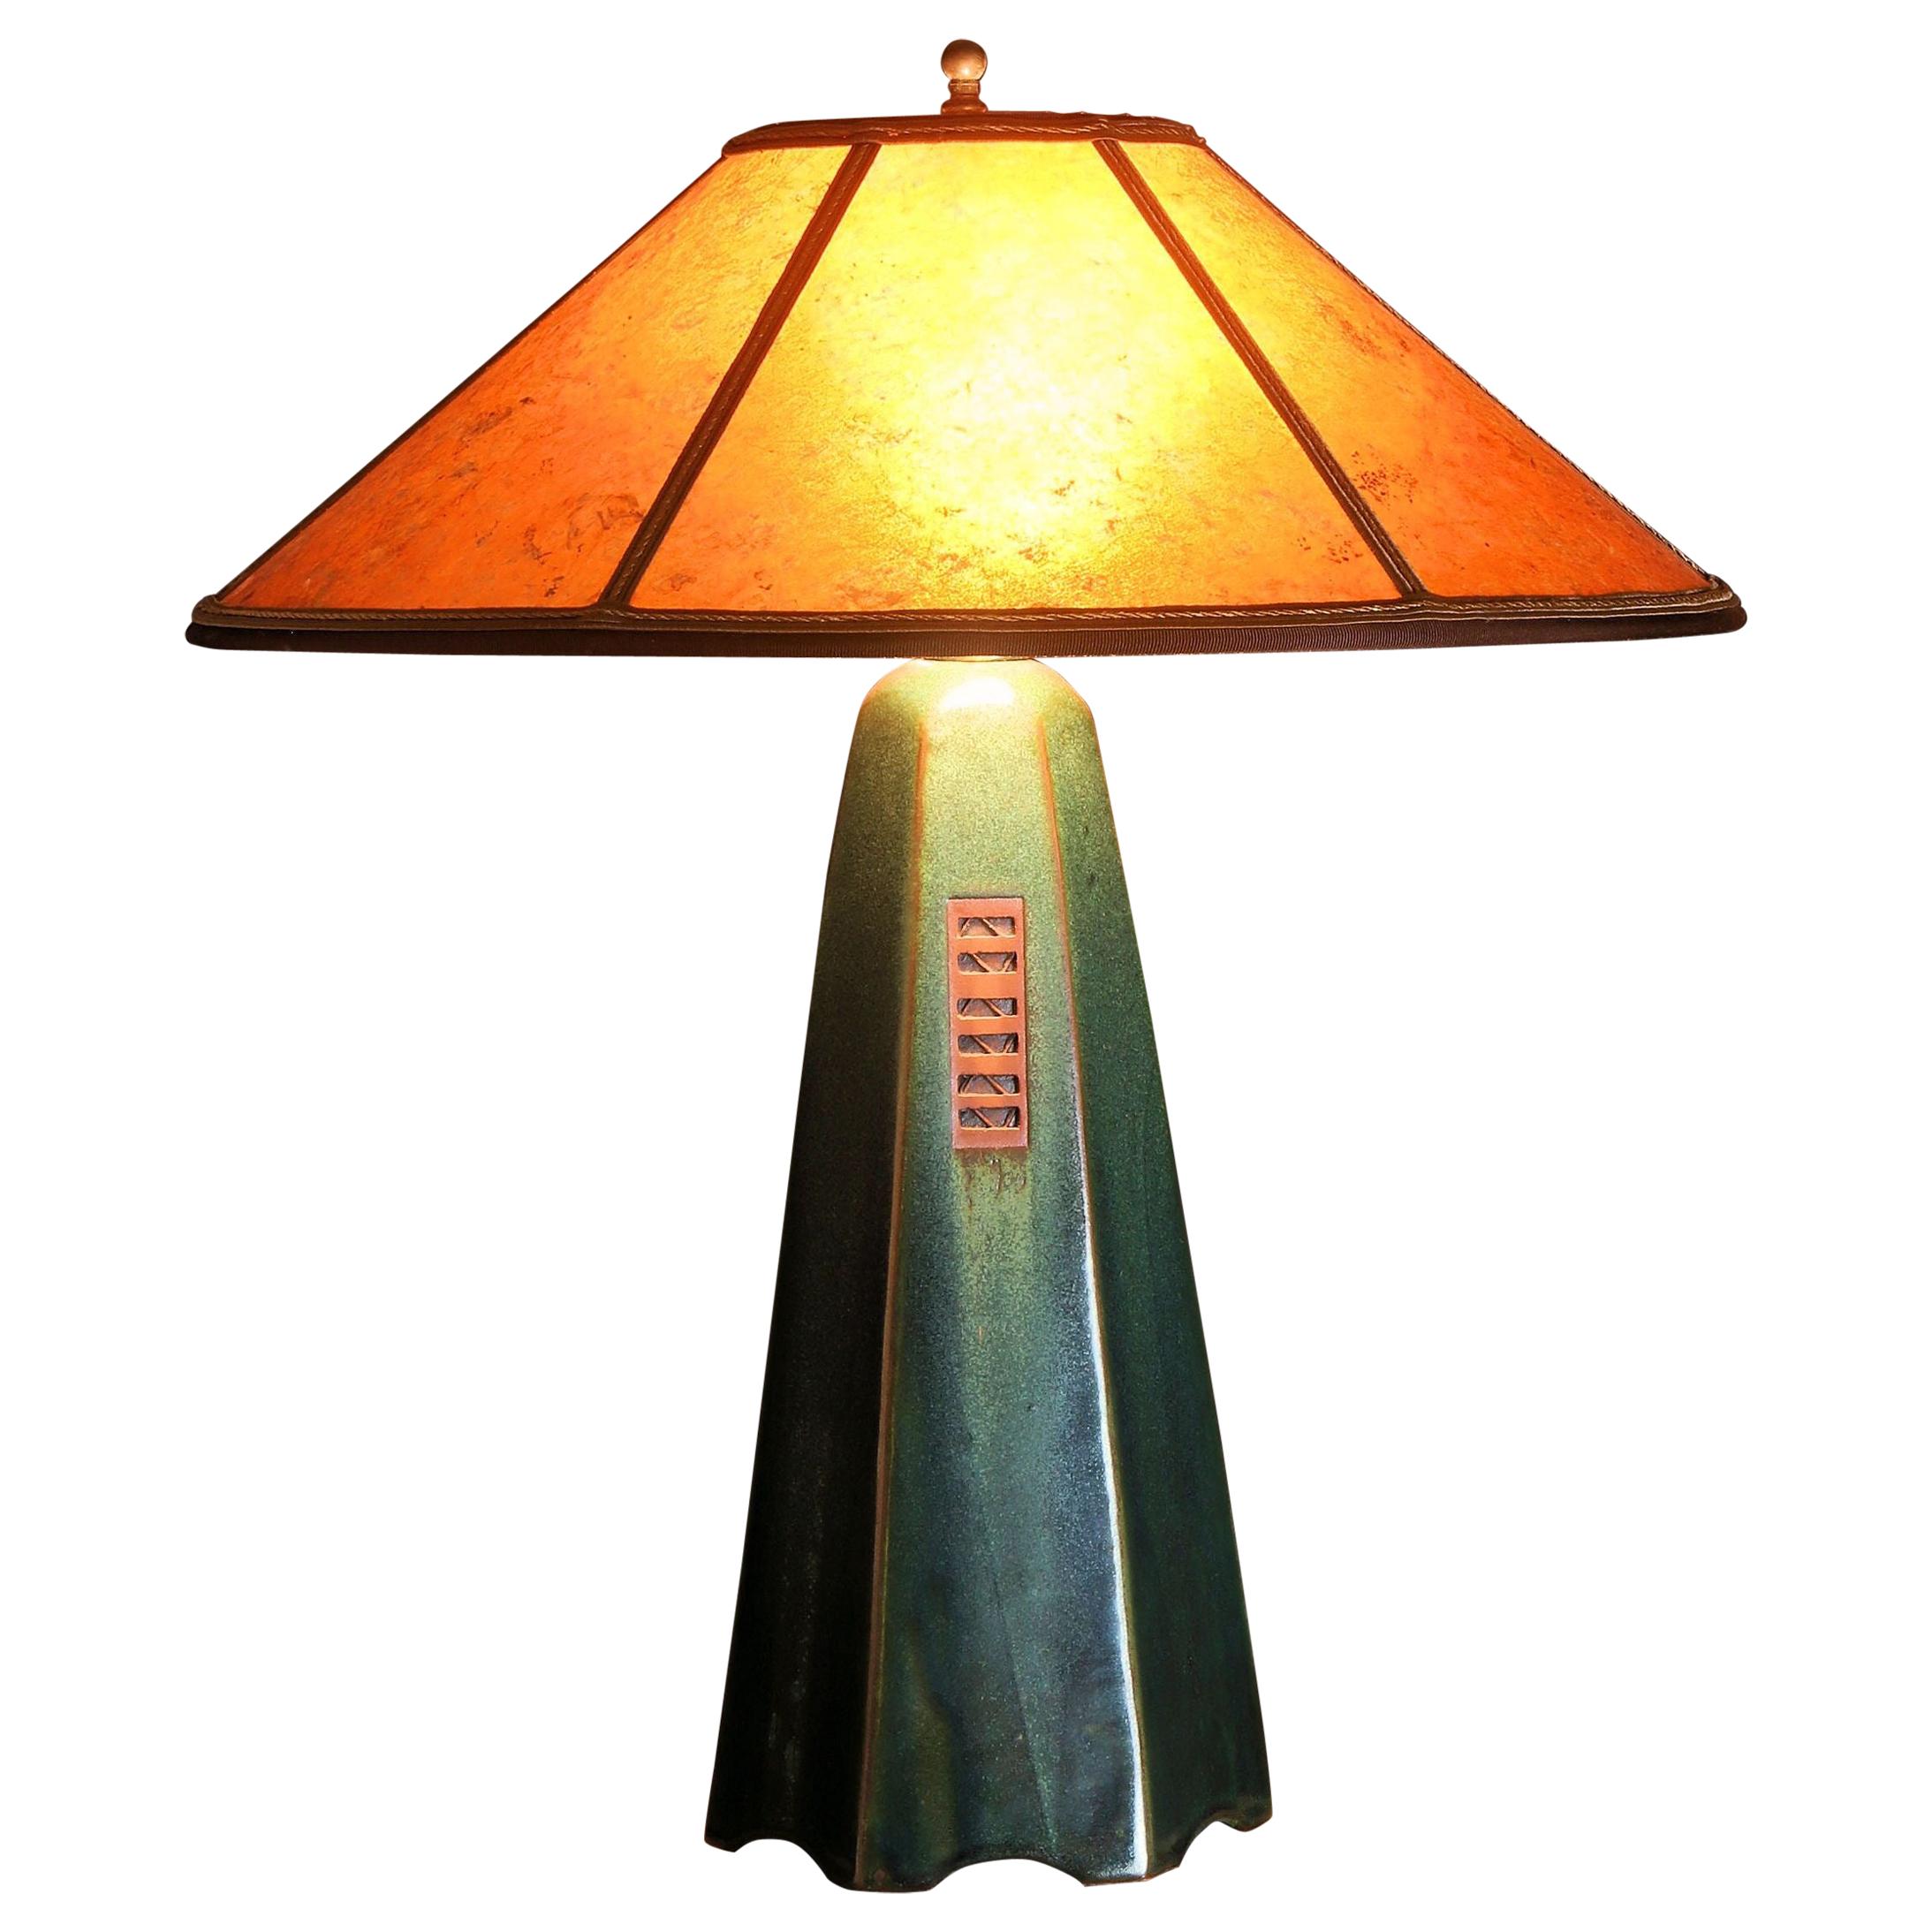 Handcrafted Artisan Stoneware Lamp in Moss Glaze with Amber Mica Shade